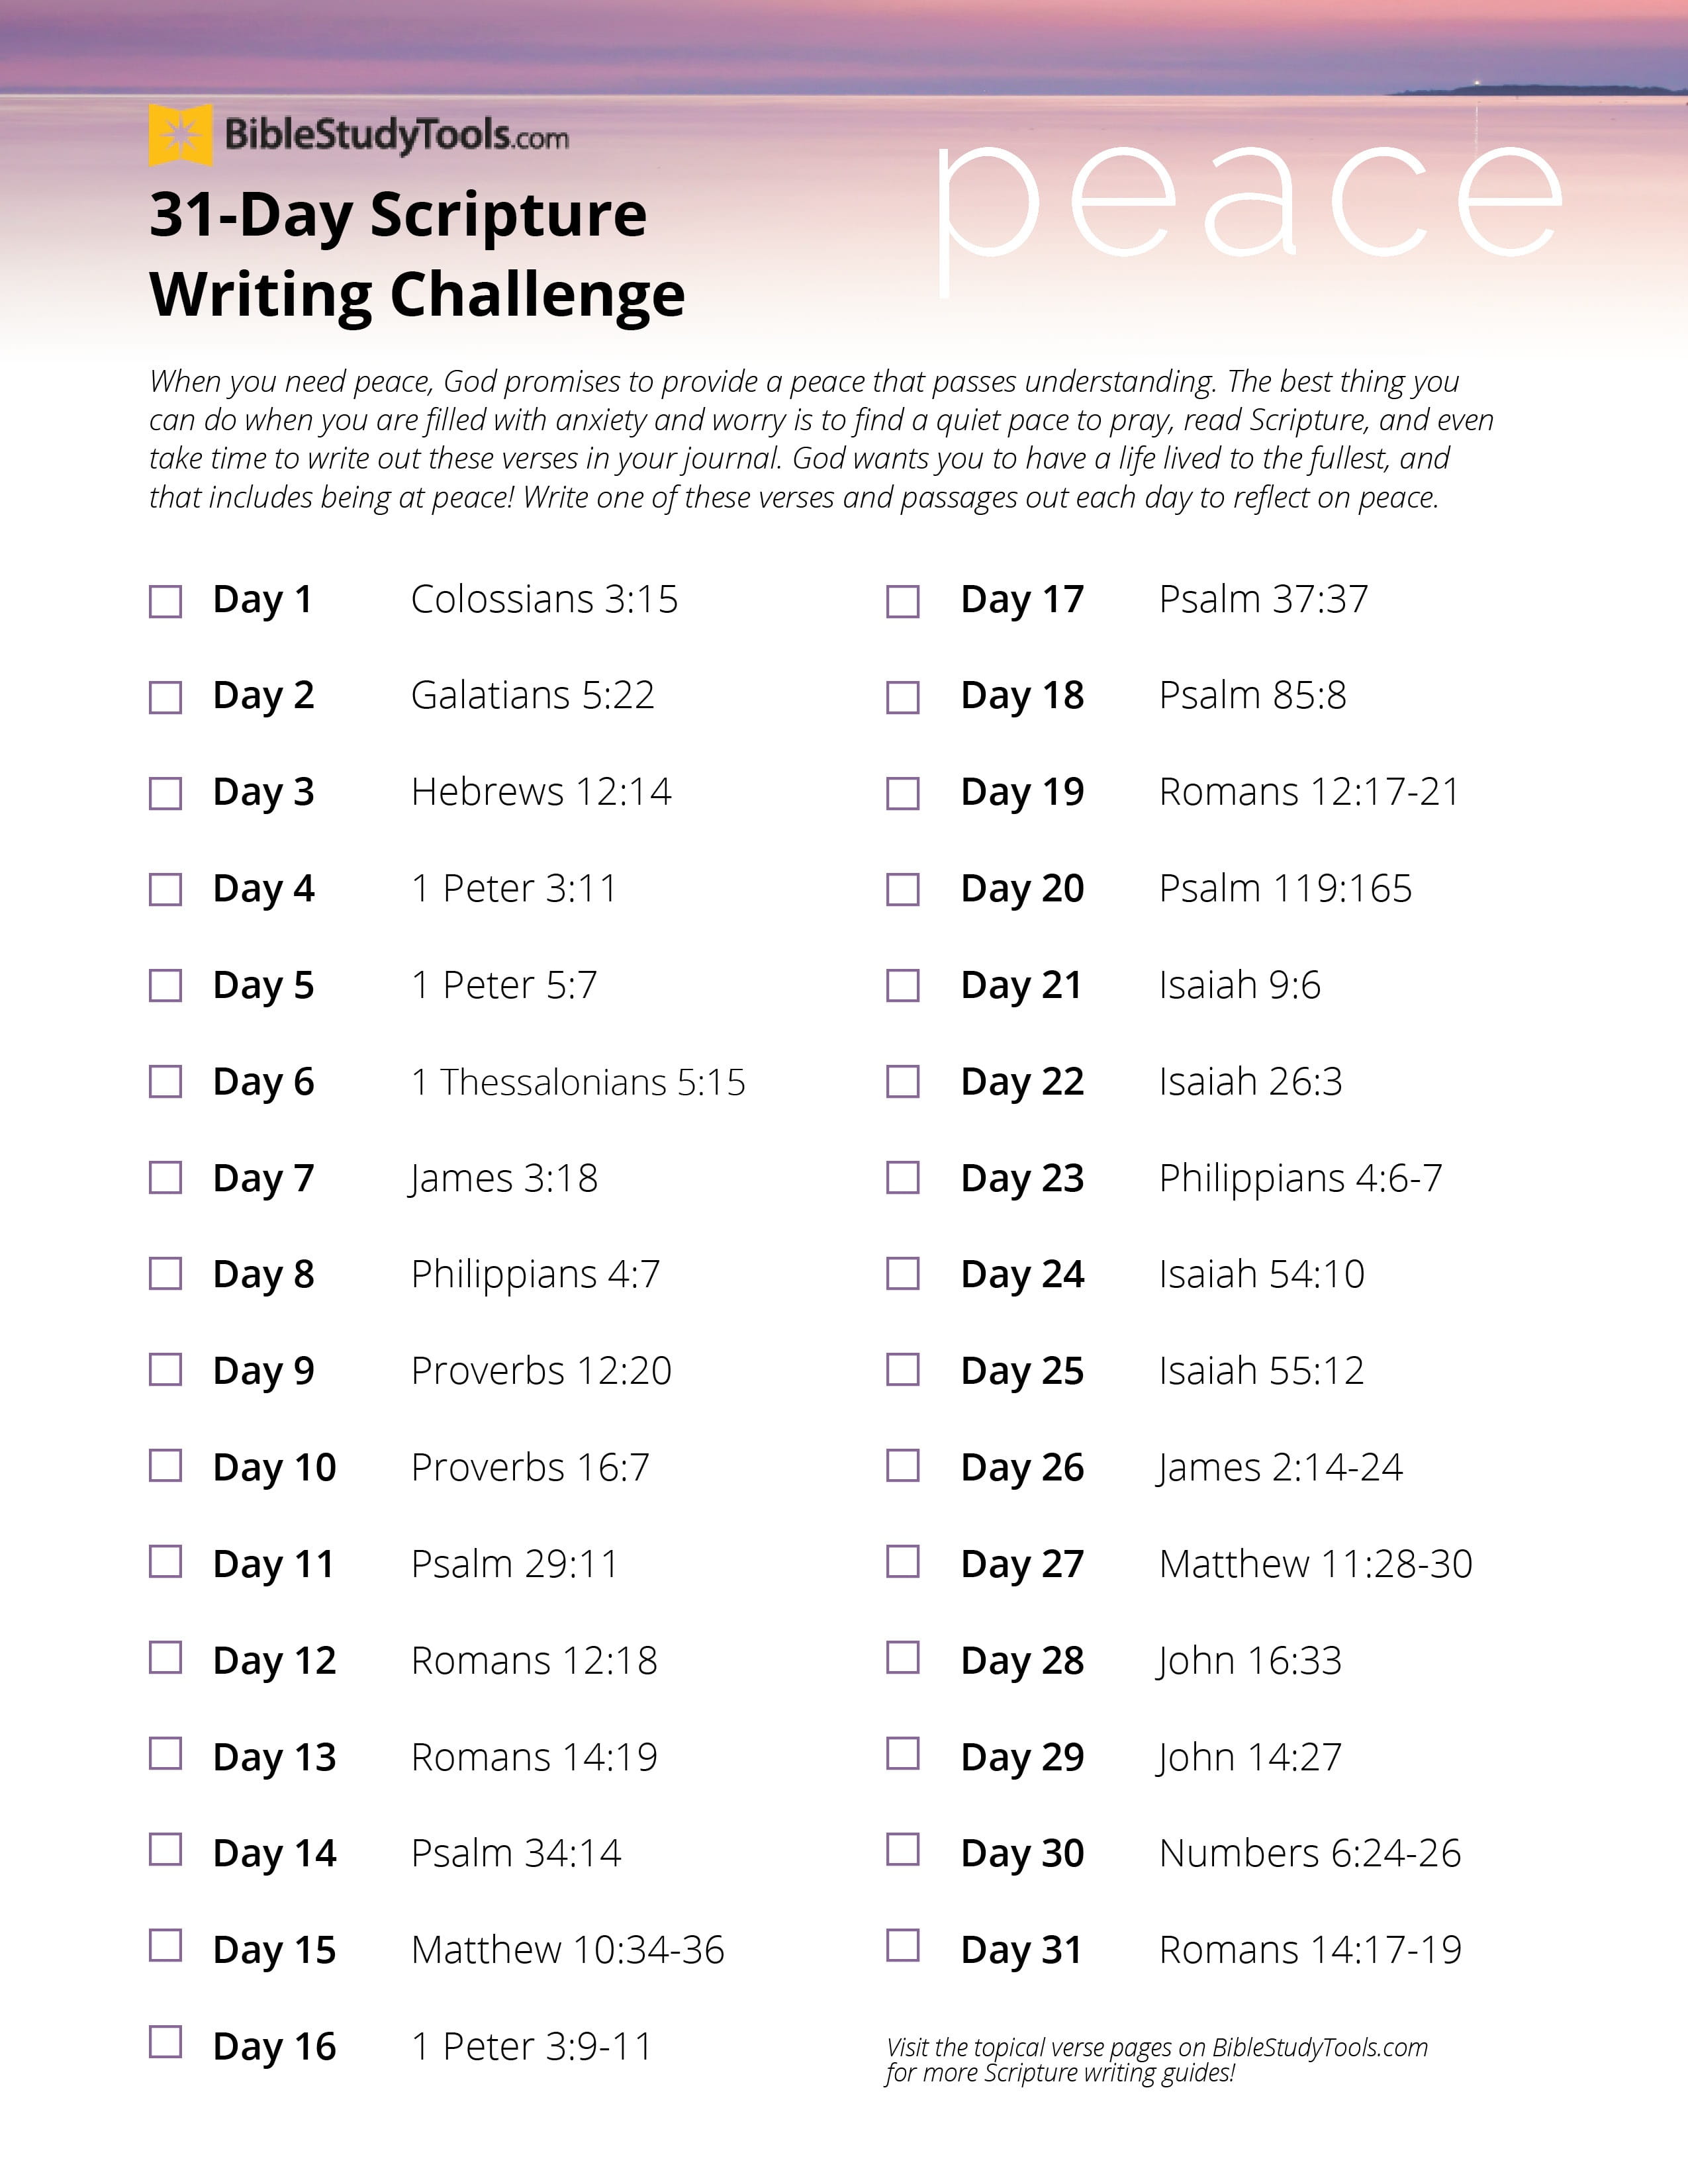 Finding Peace: 31-Day Scripture Writing Challenge - Inside BST